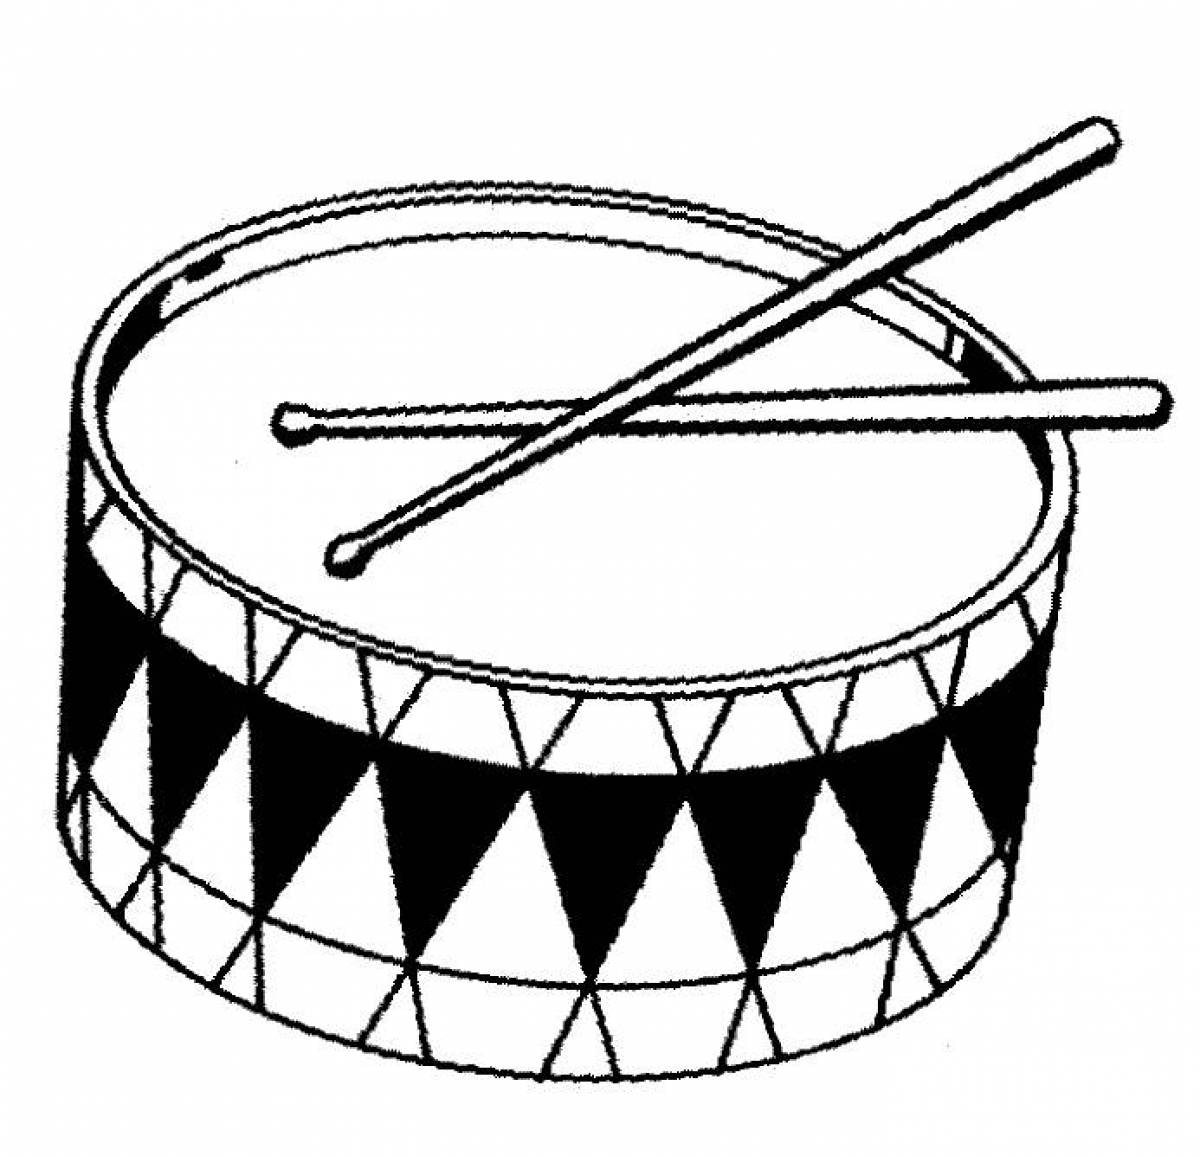 Drum coloring pages